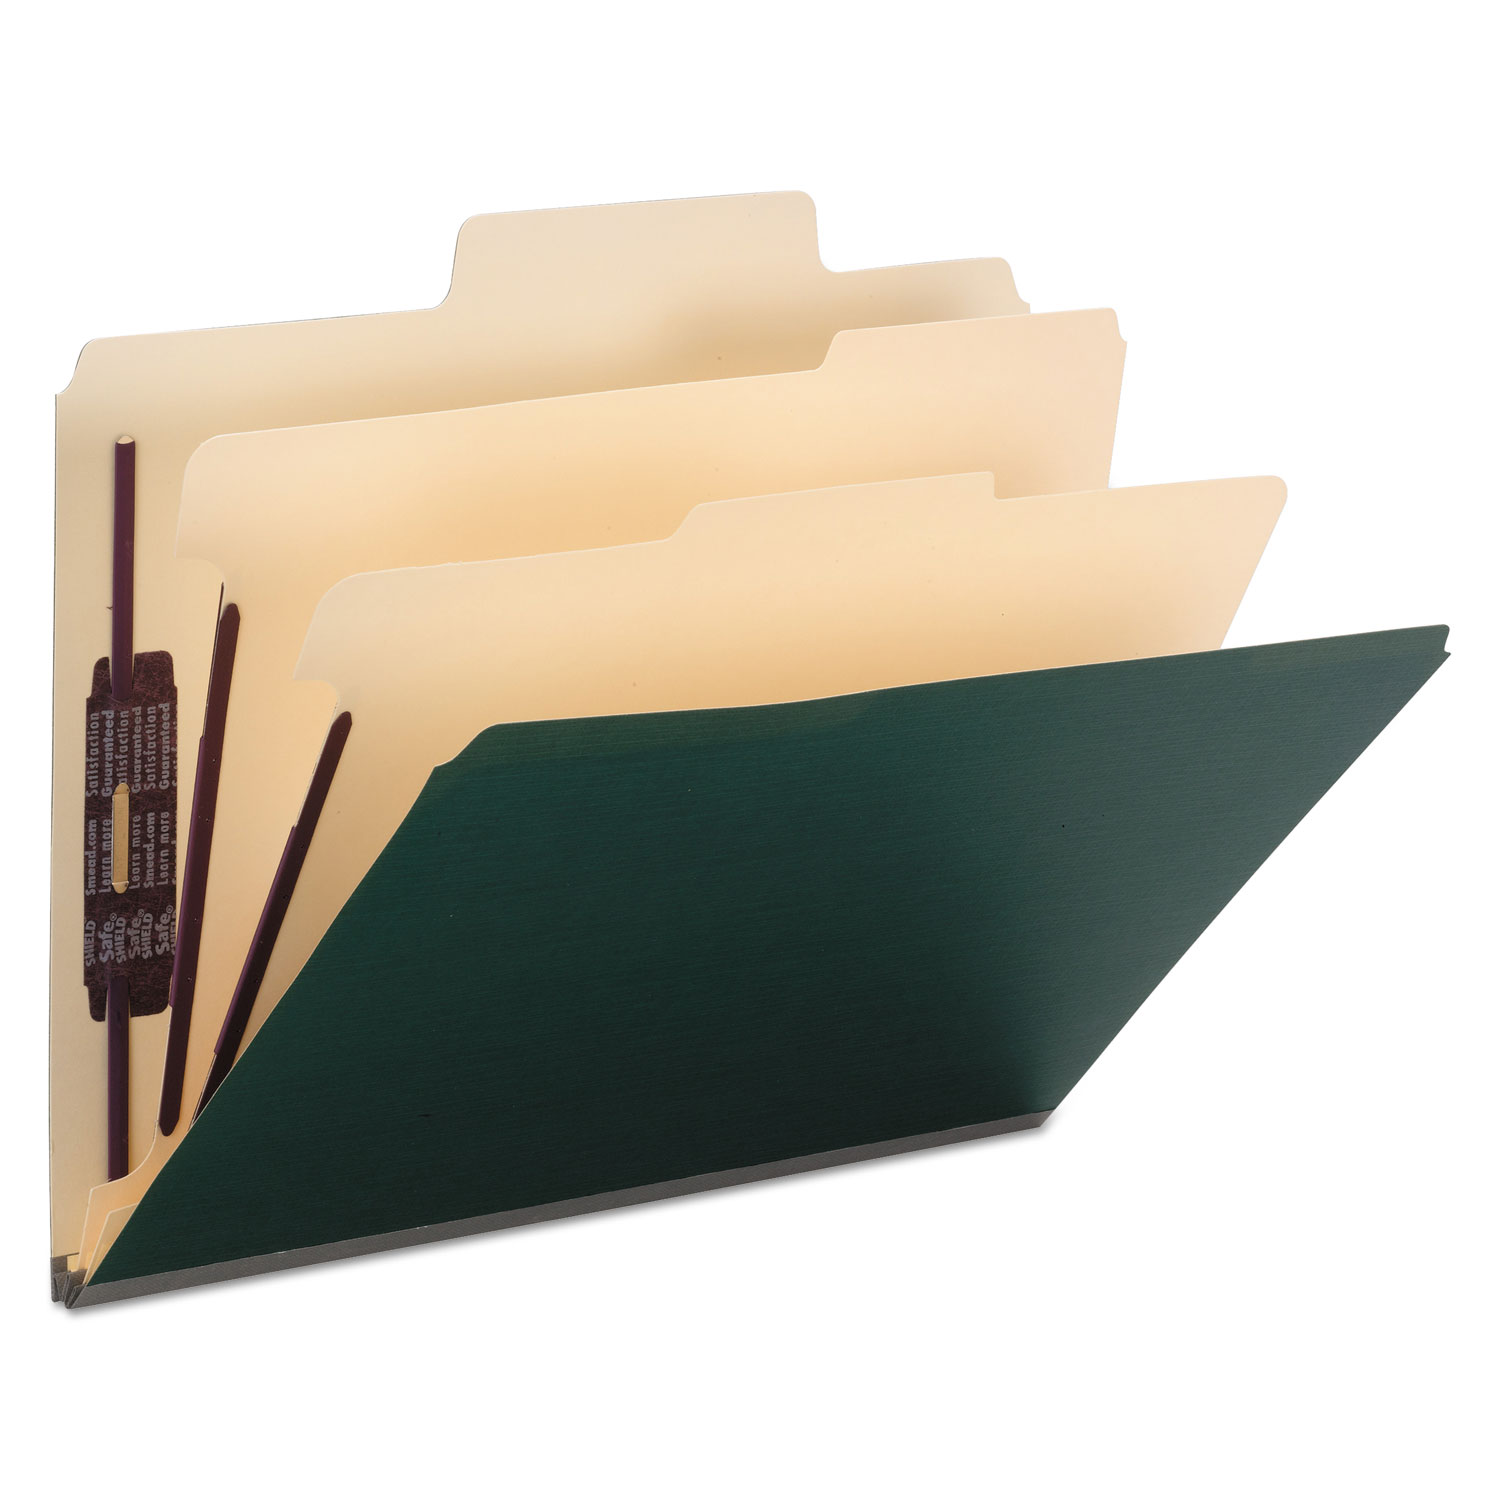  Smead 14012 SuperTab Colored Classification Folders, SafeSHIELD Coated Fastener Technology, 2 Dividers, Letter Size, Dark Green, 10/Box (SMD14012) 